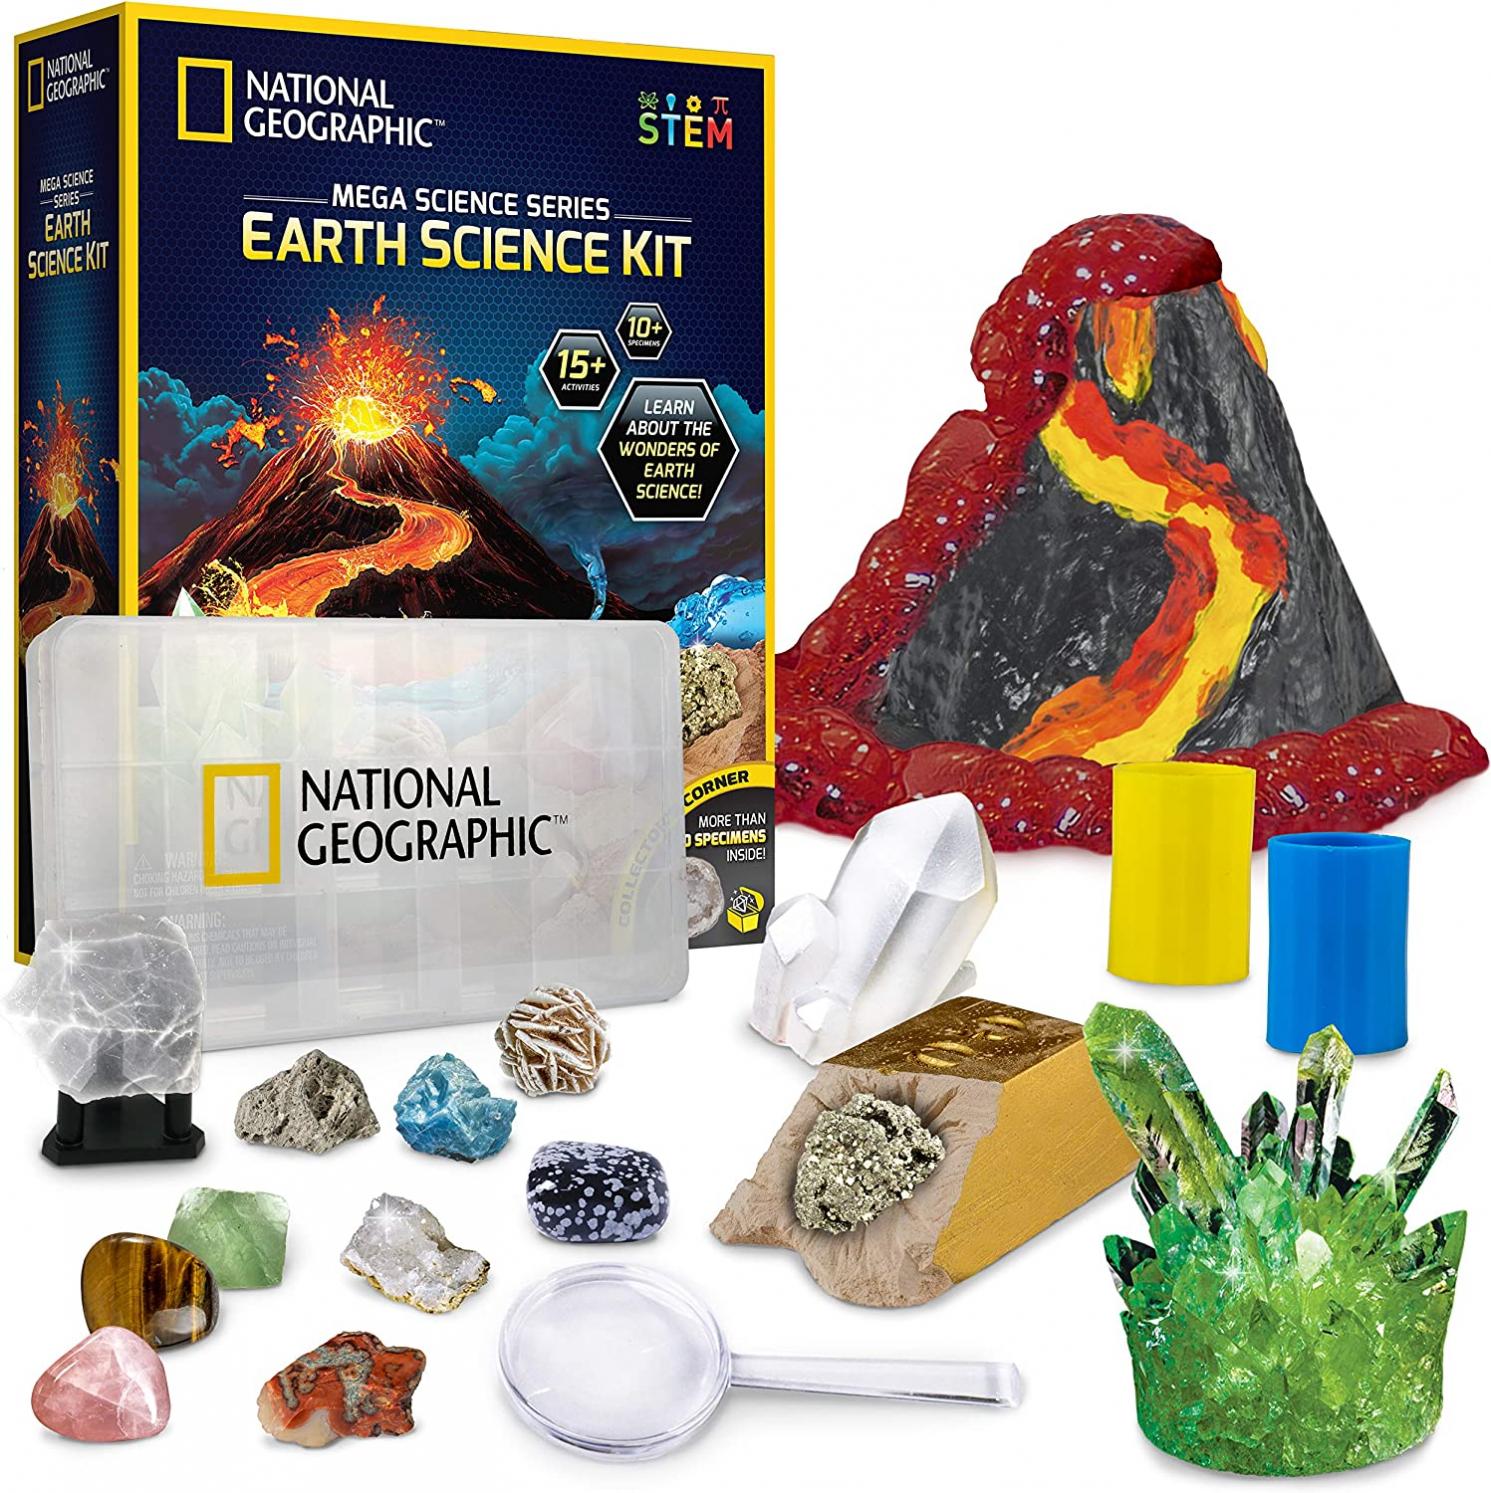 NATIONAL GEOGRAPHIC Earth Science Kit - Over 15 Science Experiments & STEM Activities for Kids, Crystal Growing, Erupting Volcanos, 2 Dig Kits & 10 Genuine Specimens, a Great STEM Science Kit